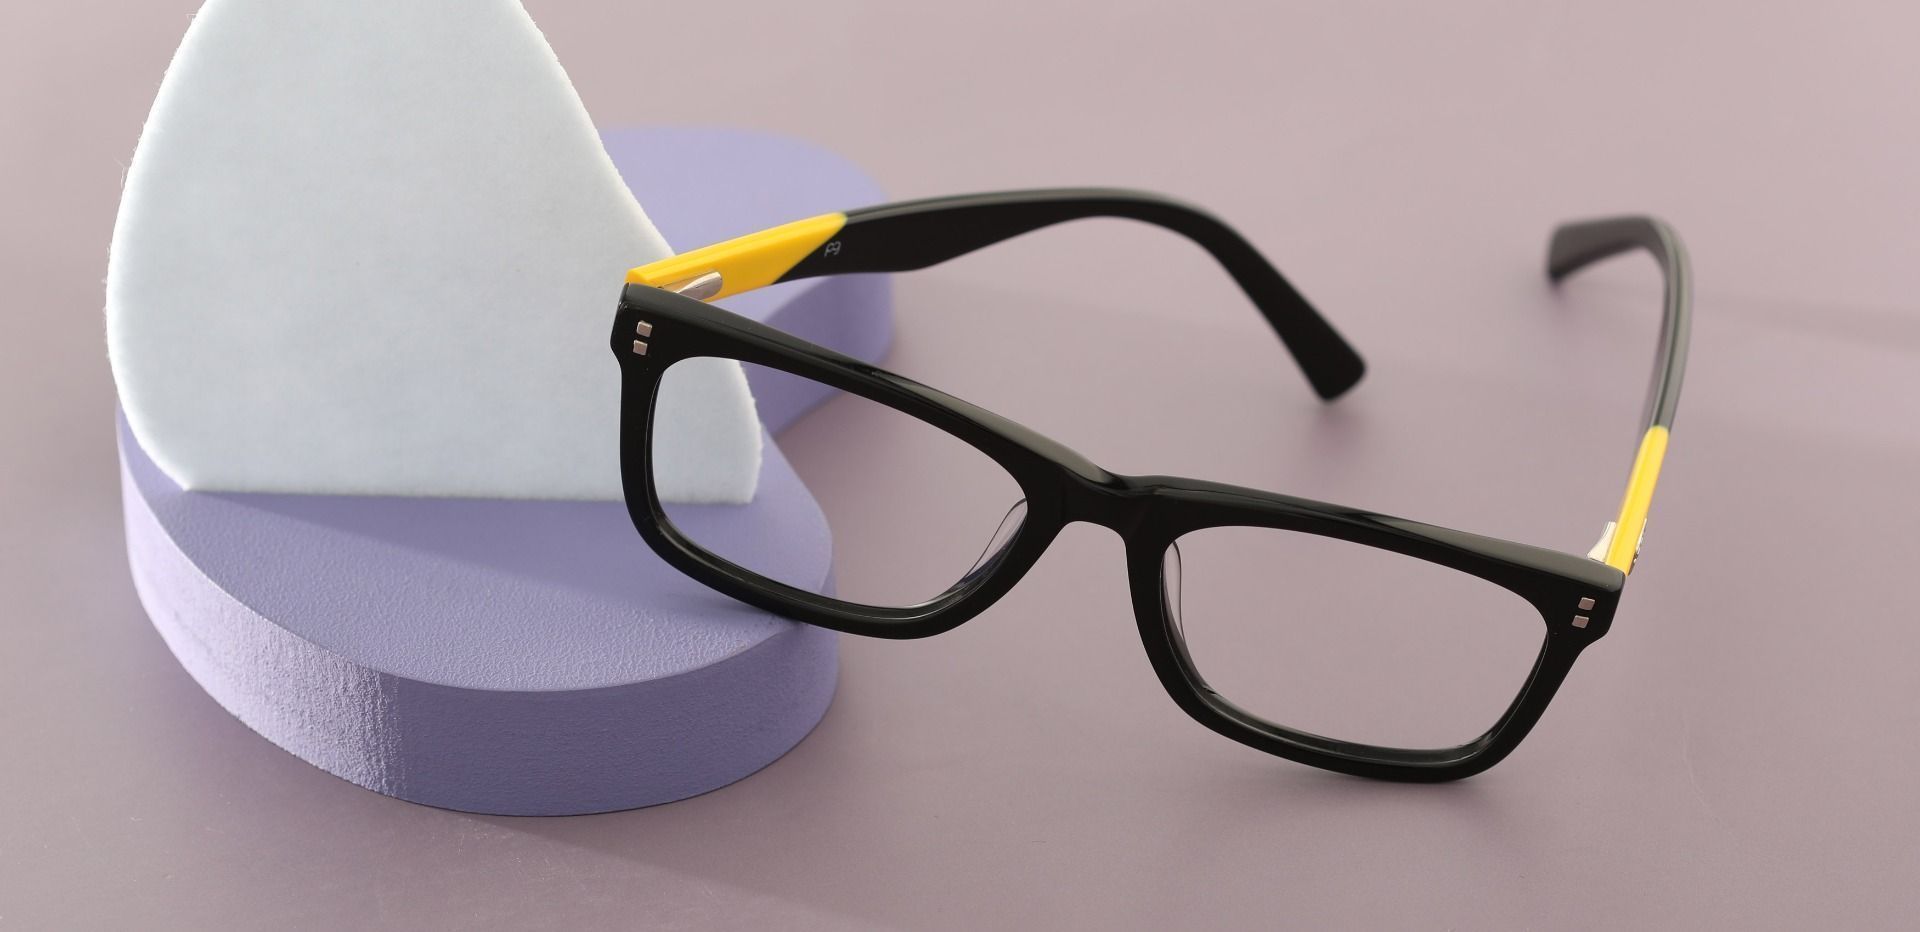 Liberty Rectangle Eyeglasses Frame - The Frame Is Black And Gold